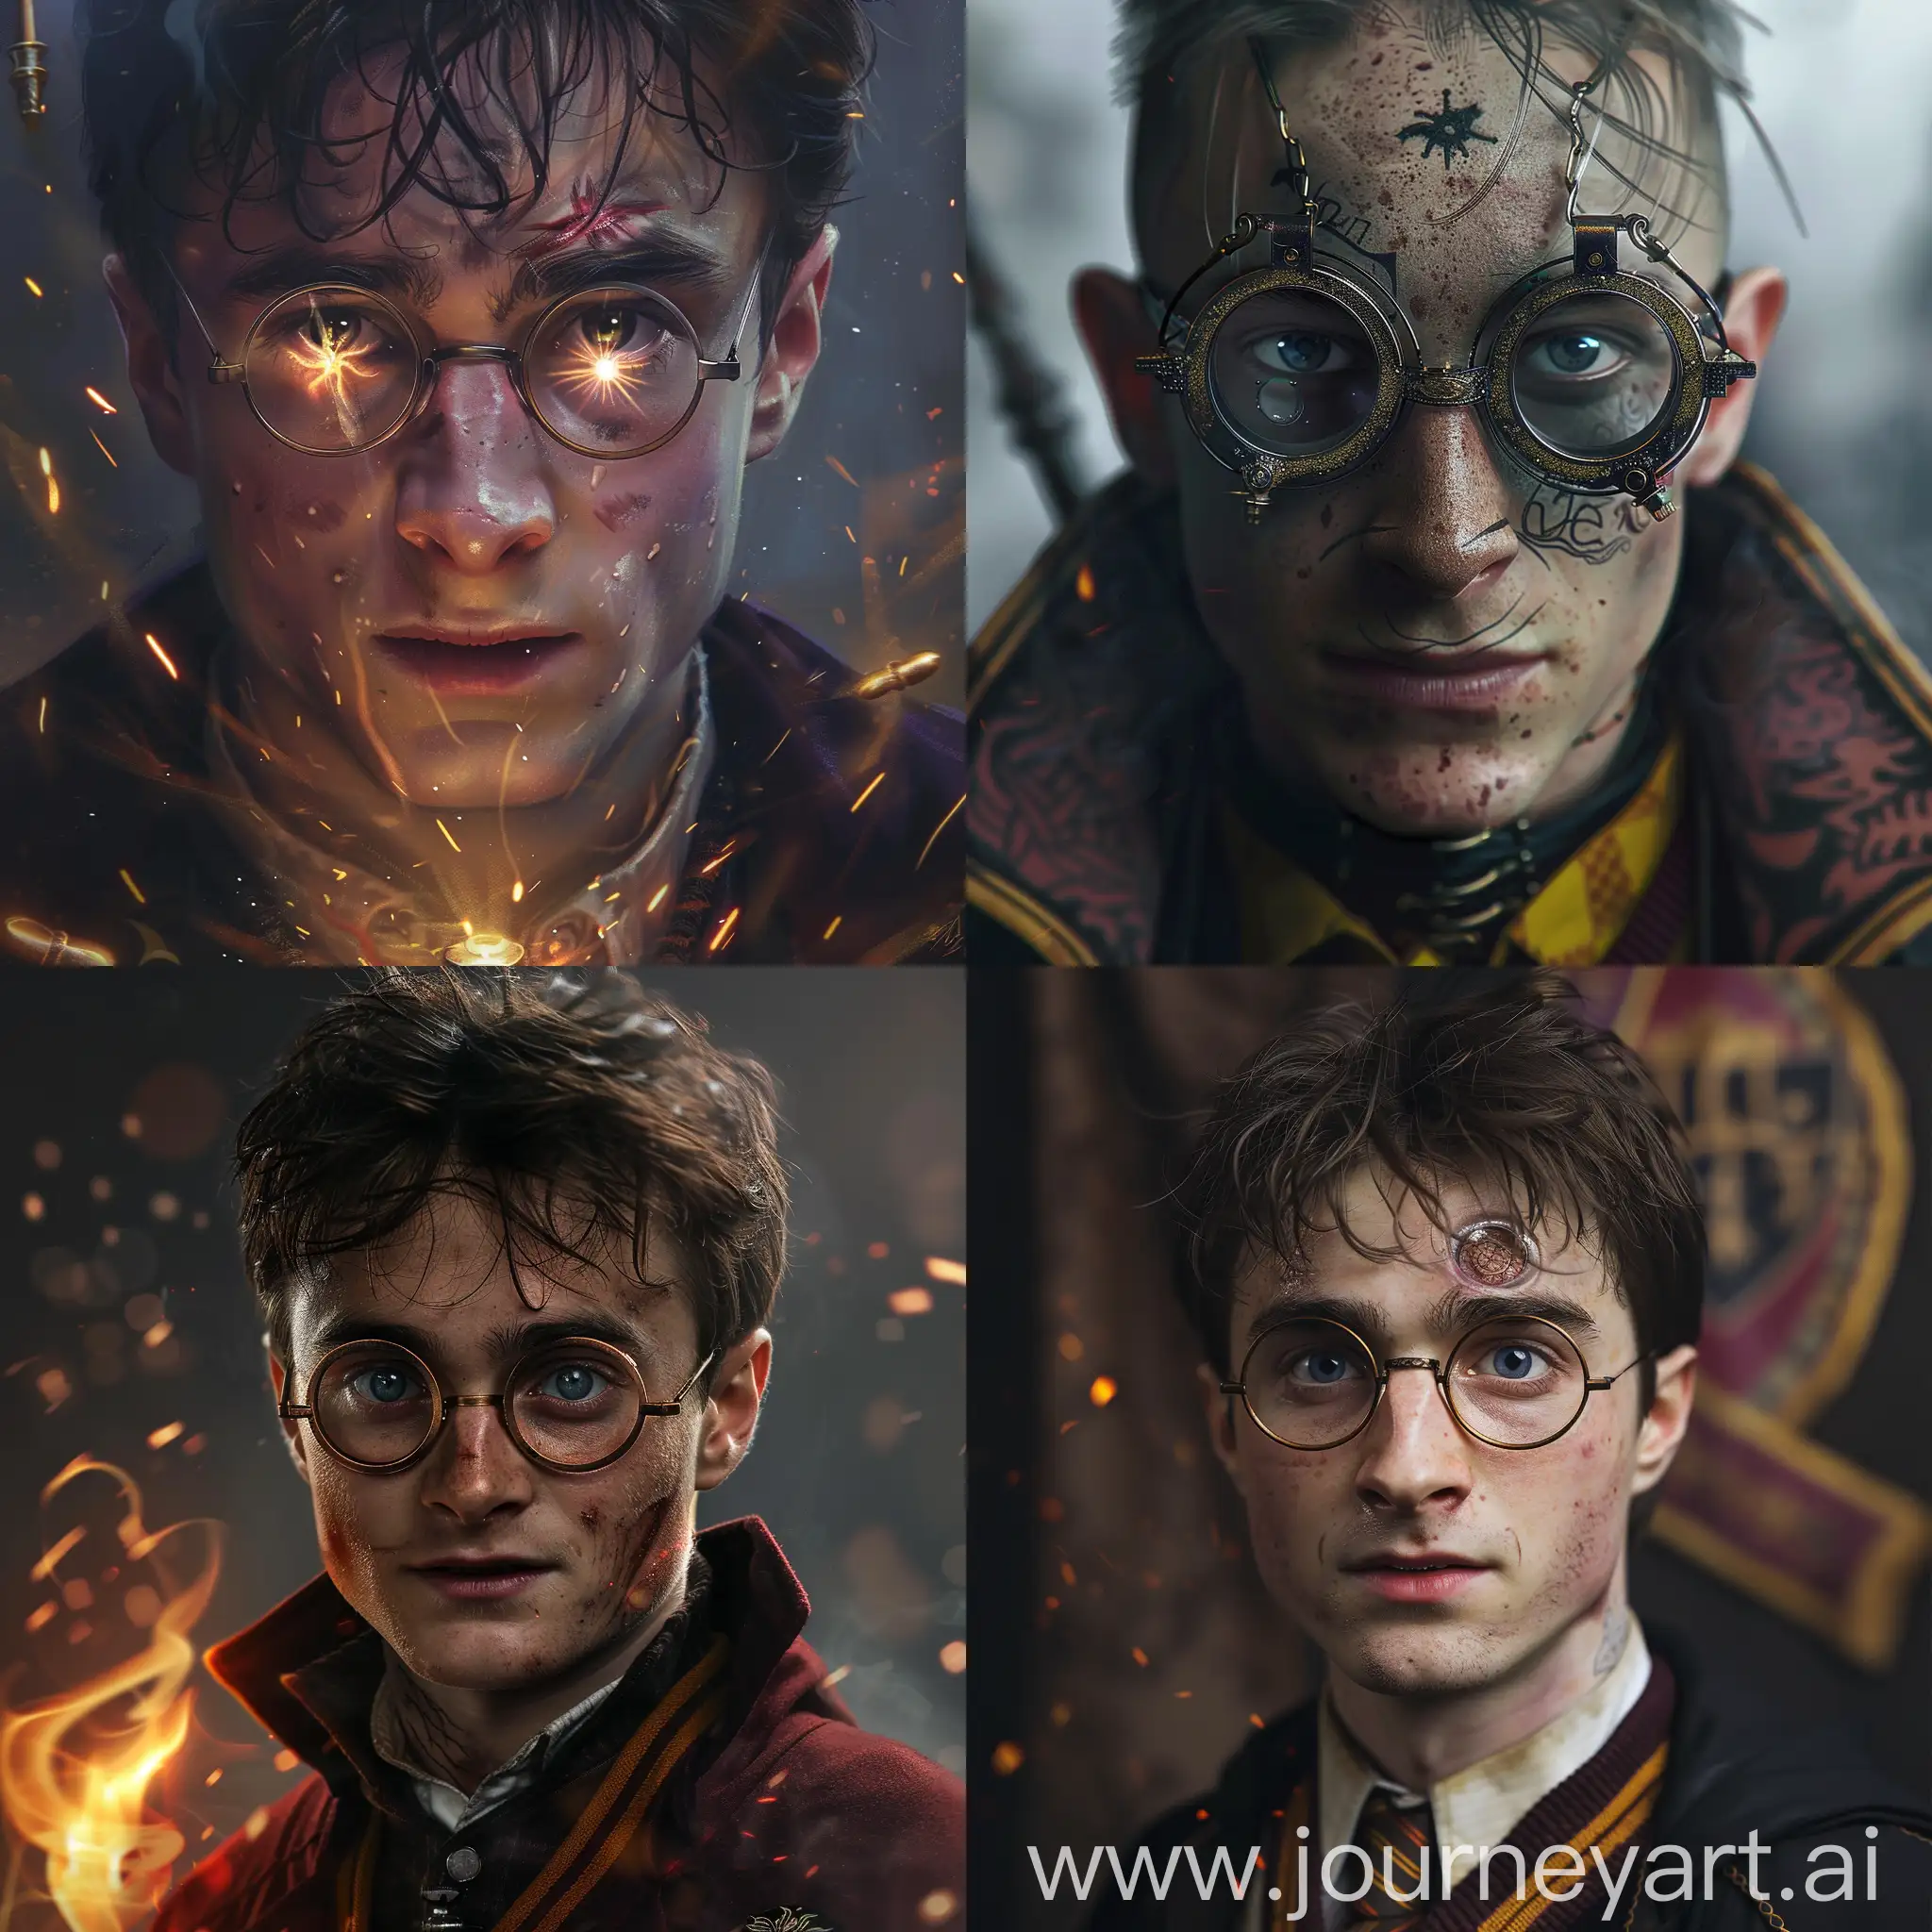 Harry-Potter-Quidditch-Scene-with-Steampunk-Glasses-and-Patronus-Spell